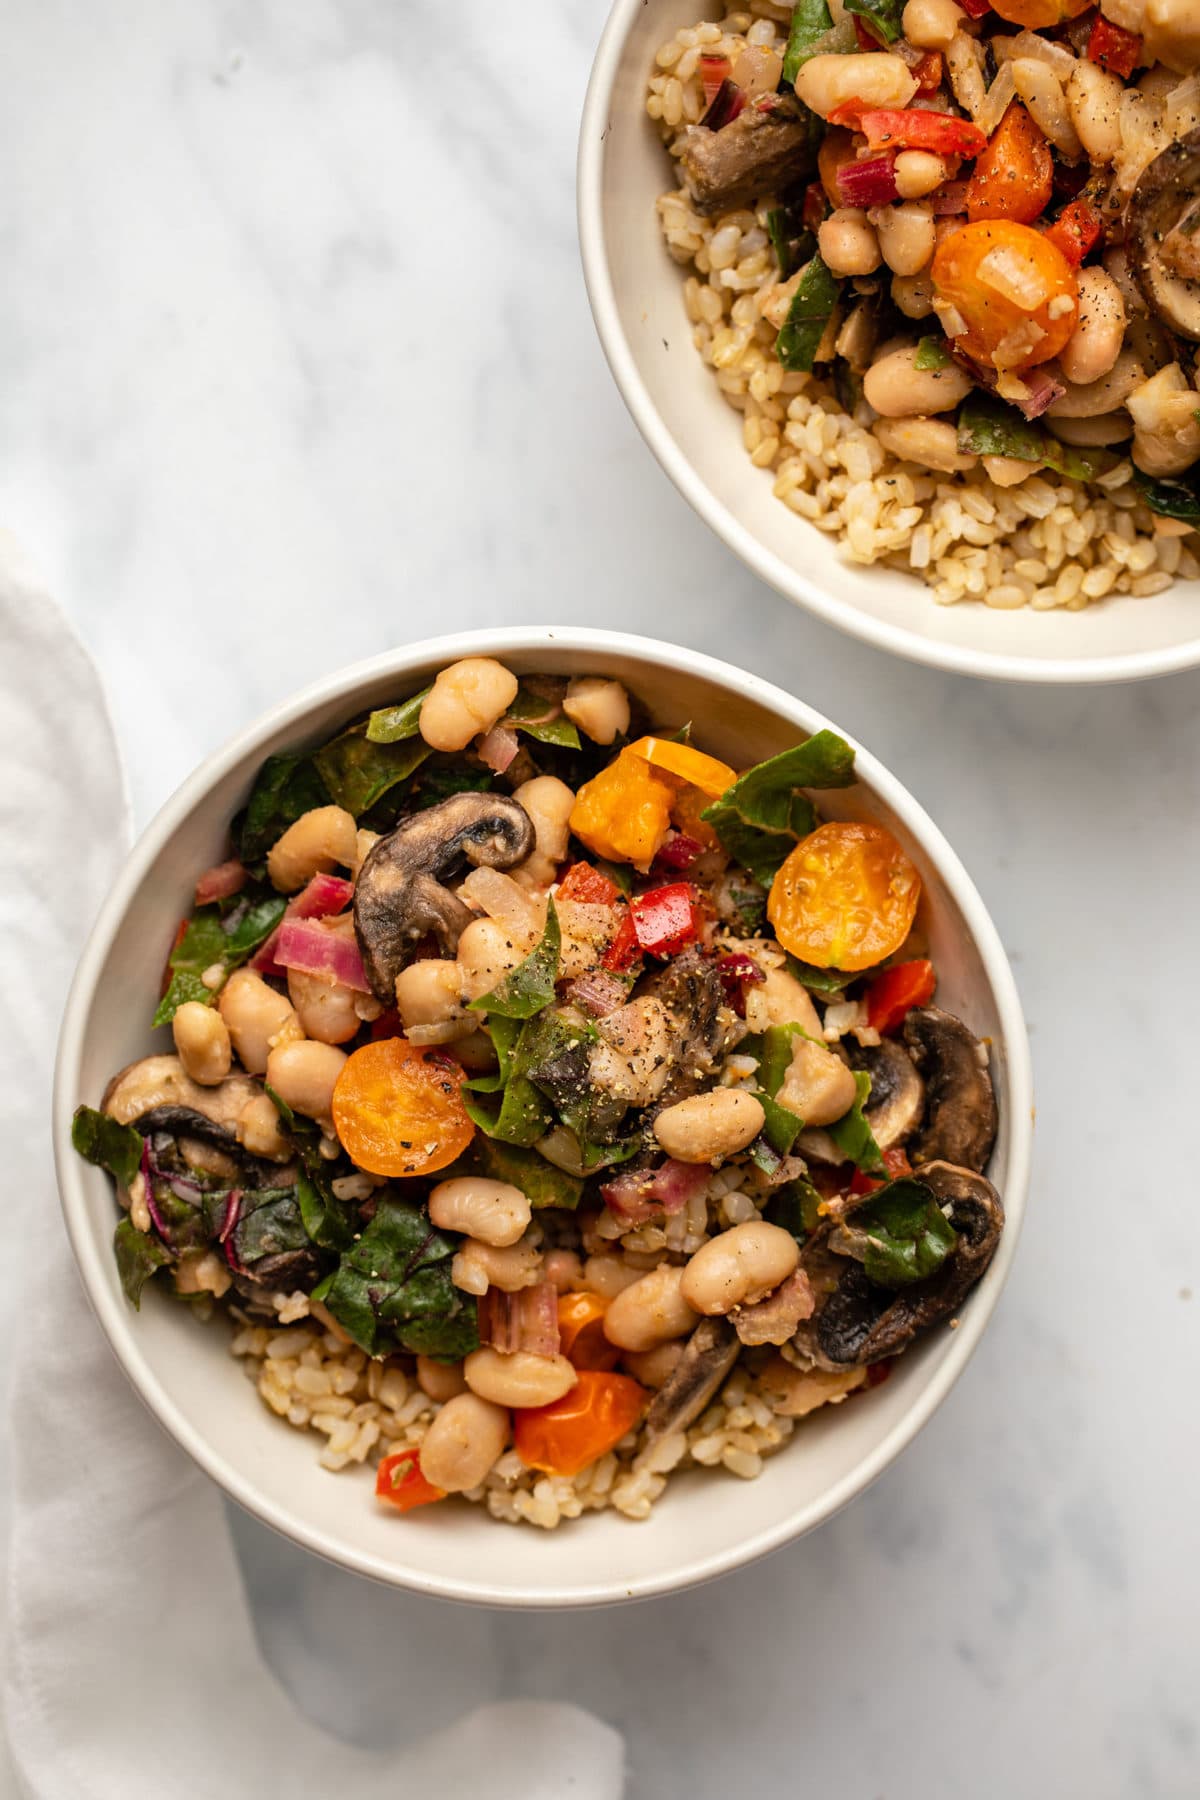 Two white bowls of white bean stir fry with brown rice on marble countertop